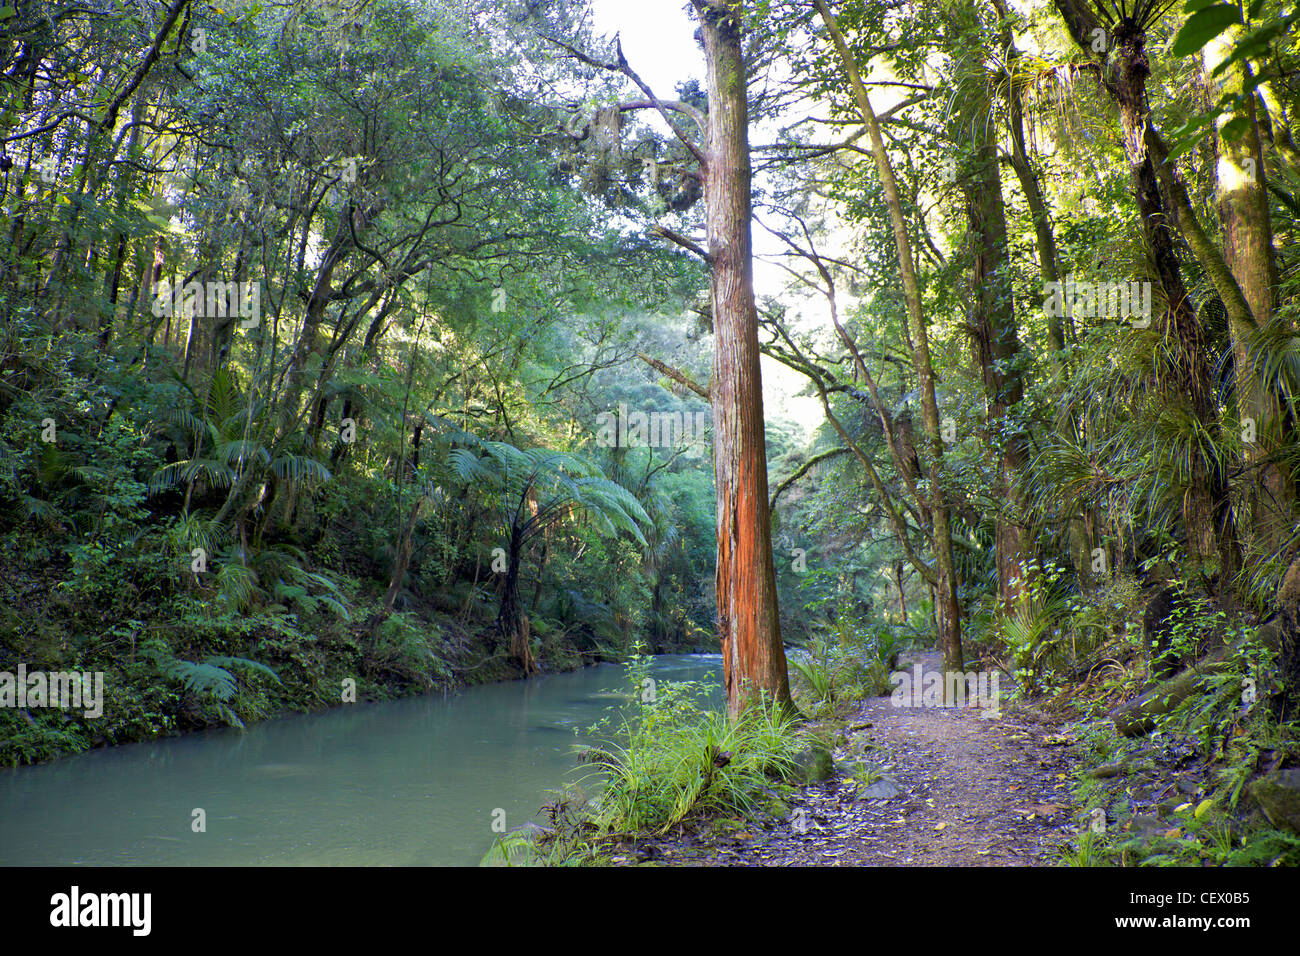 The Hatea River, just below the Whangarei Falls, North Island, New Zealand. Stock Photo